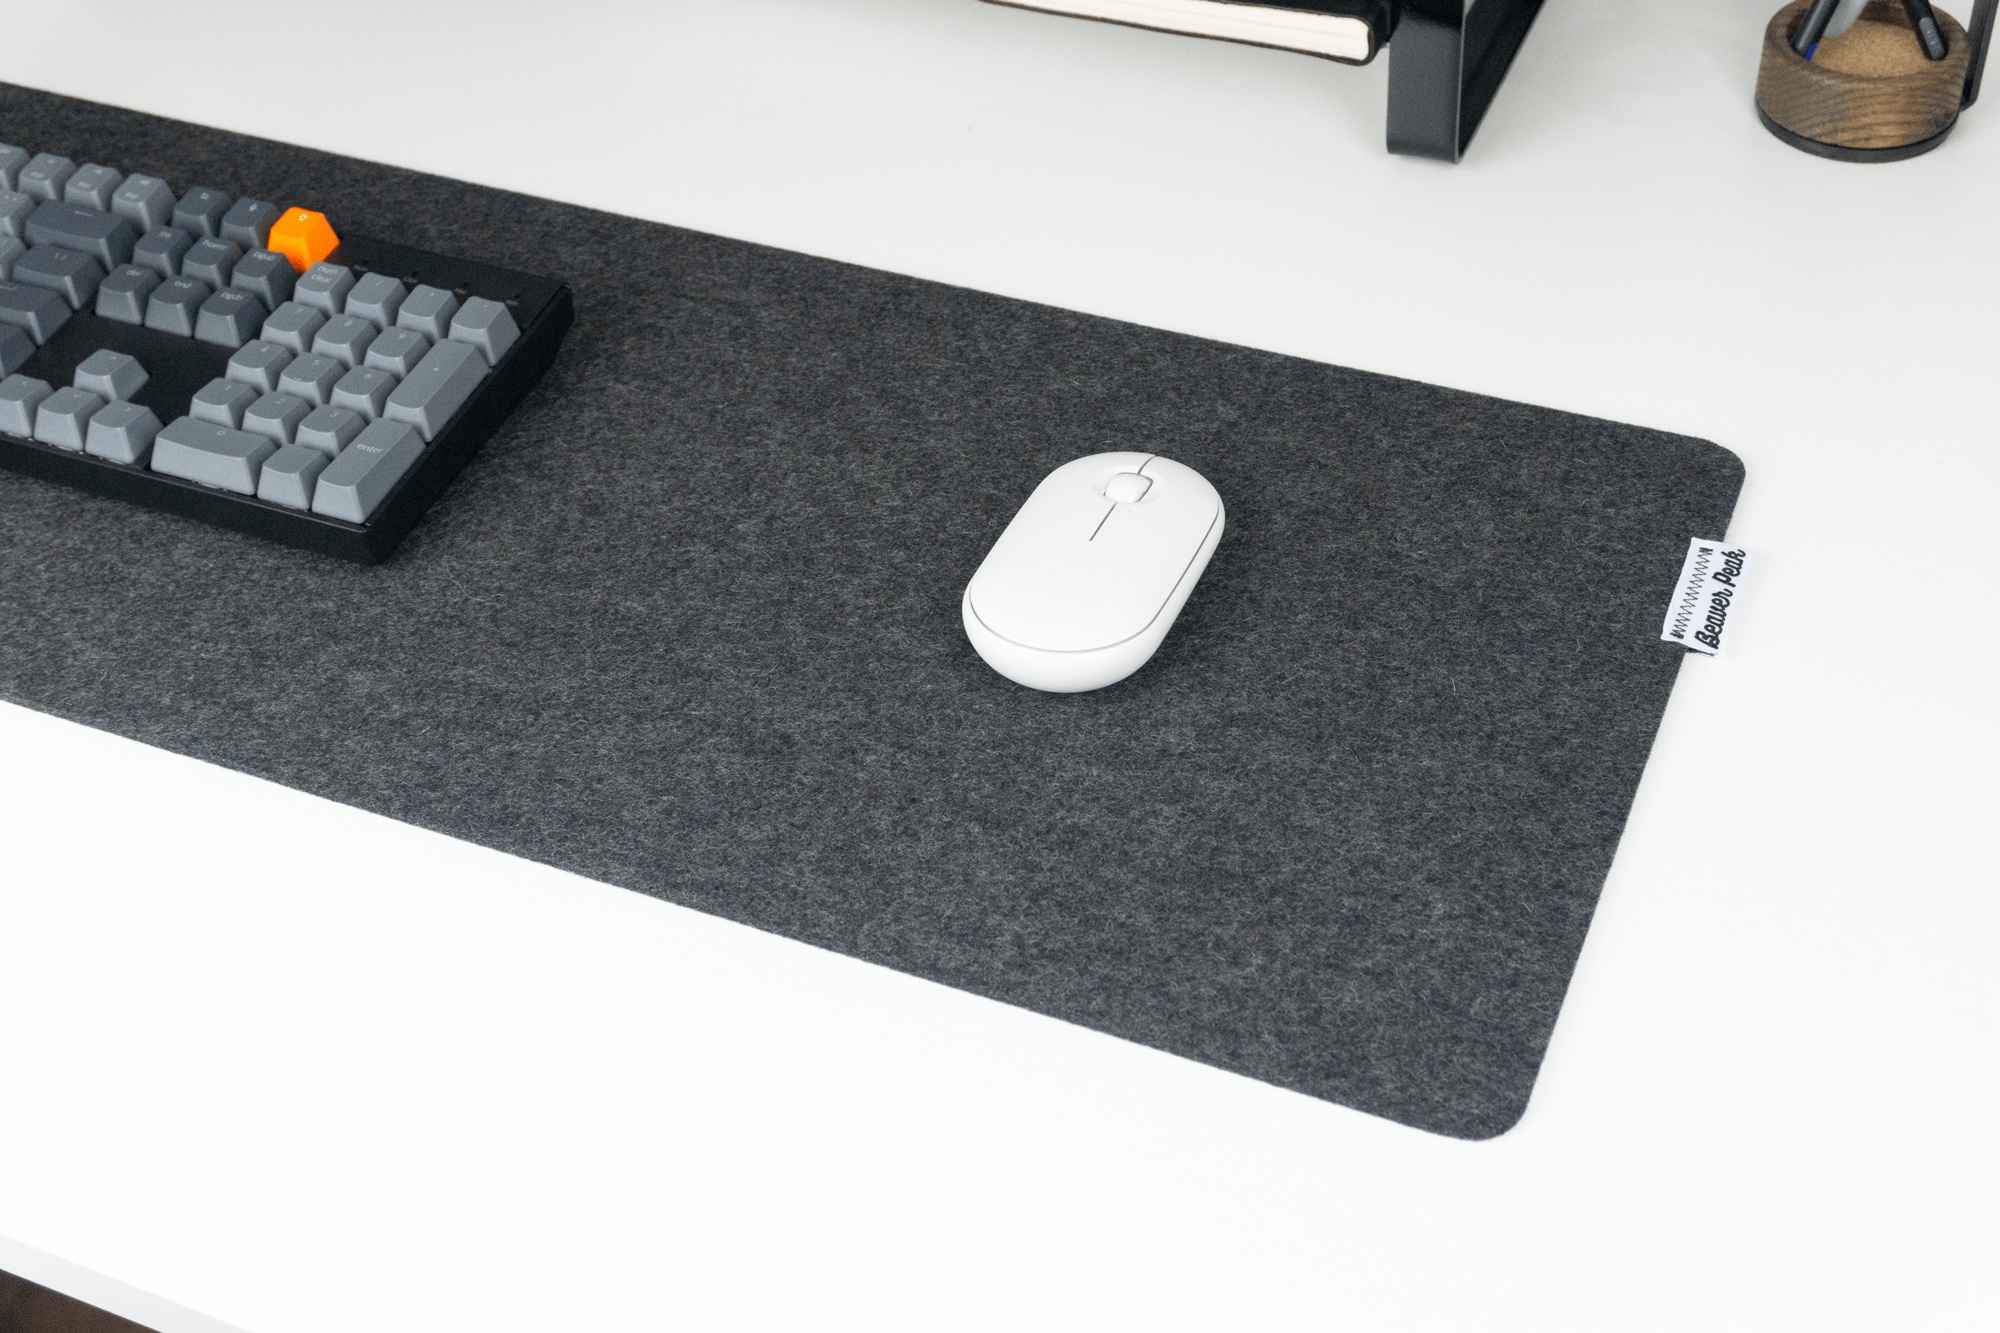 Black wool desk mat with white mouse and mechanical keyboard on top